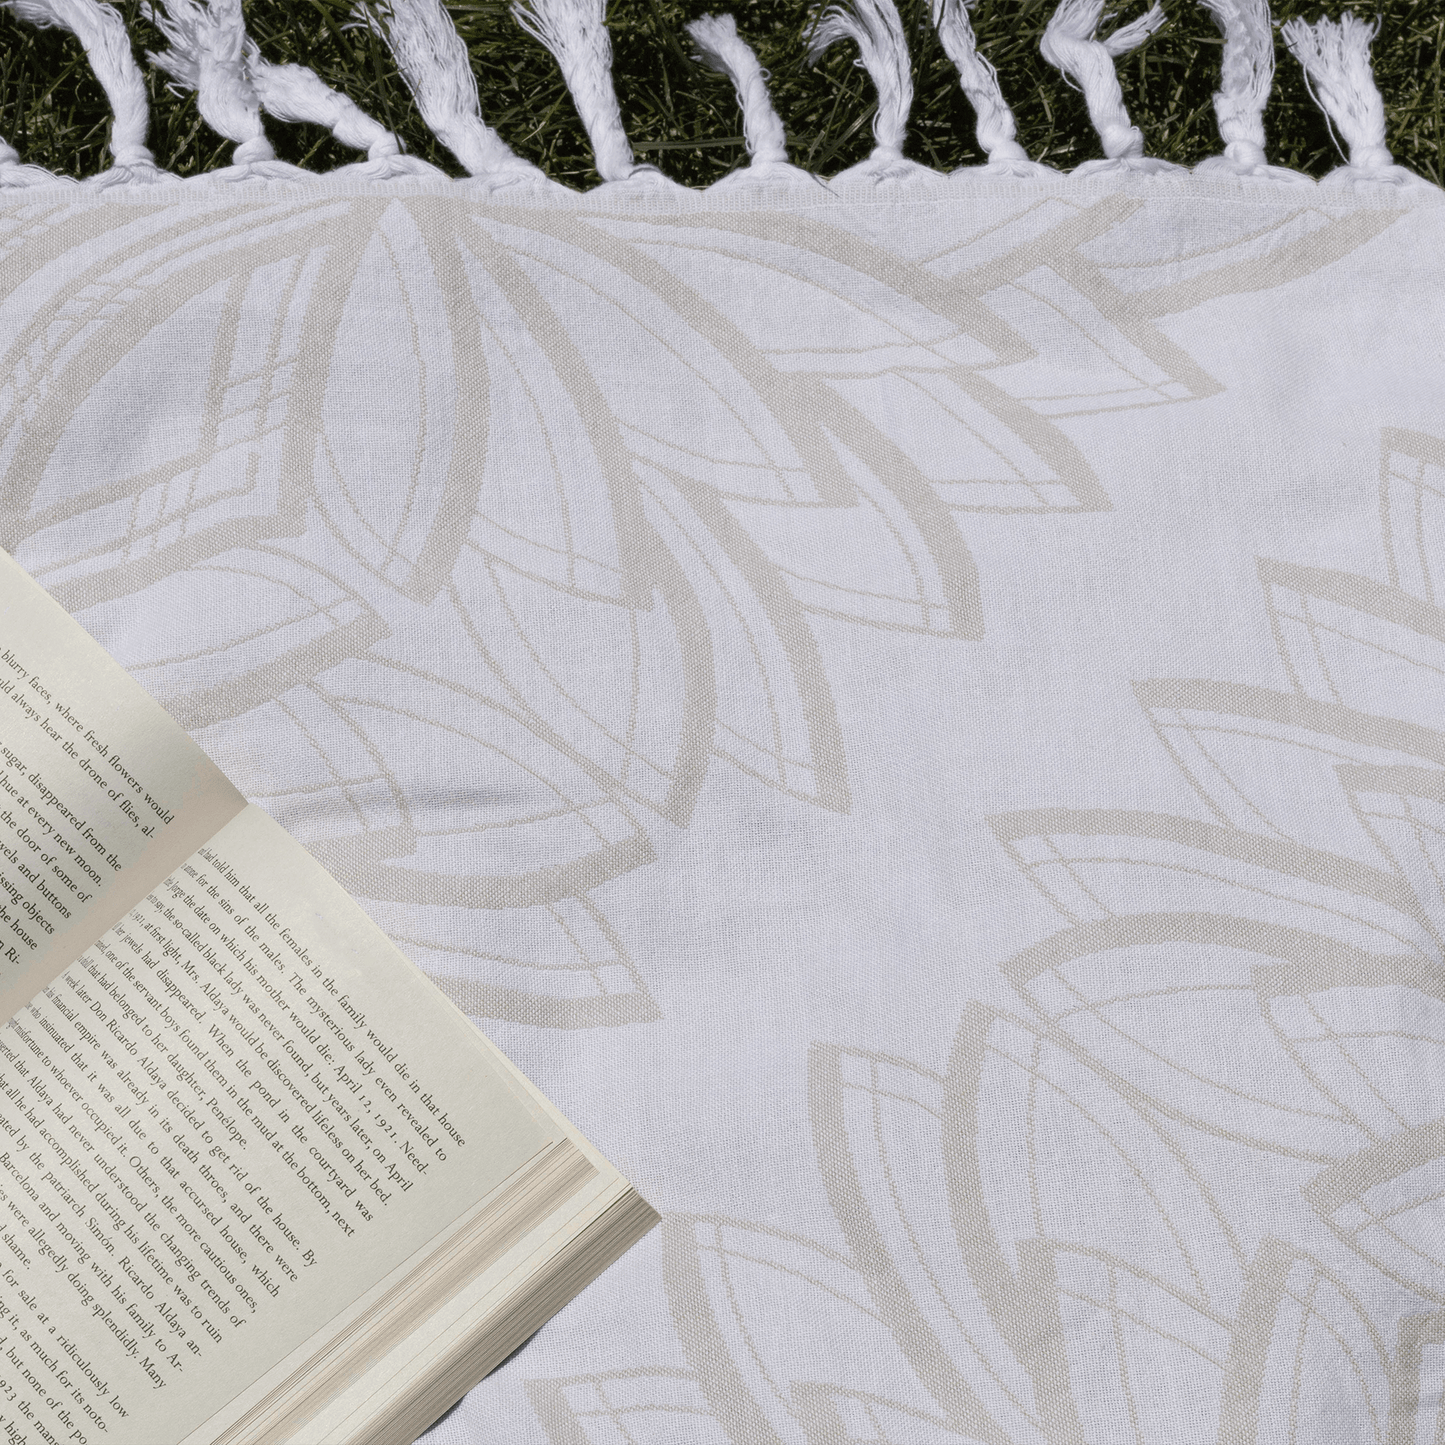 Turkish towel in the summer with a book